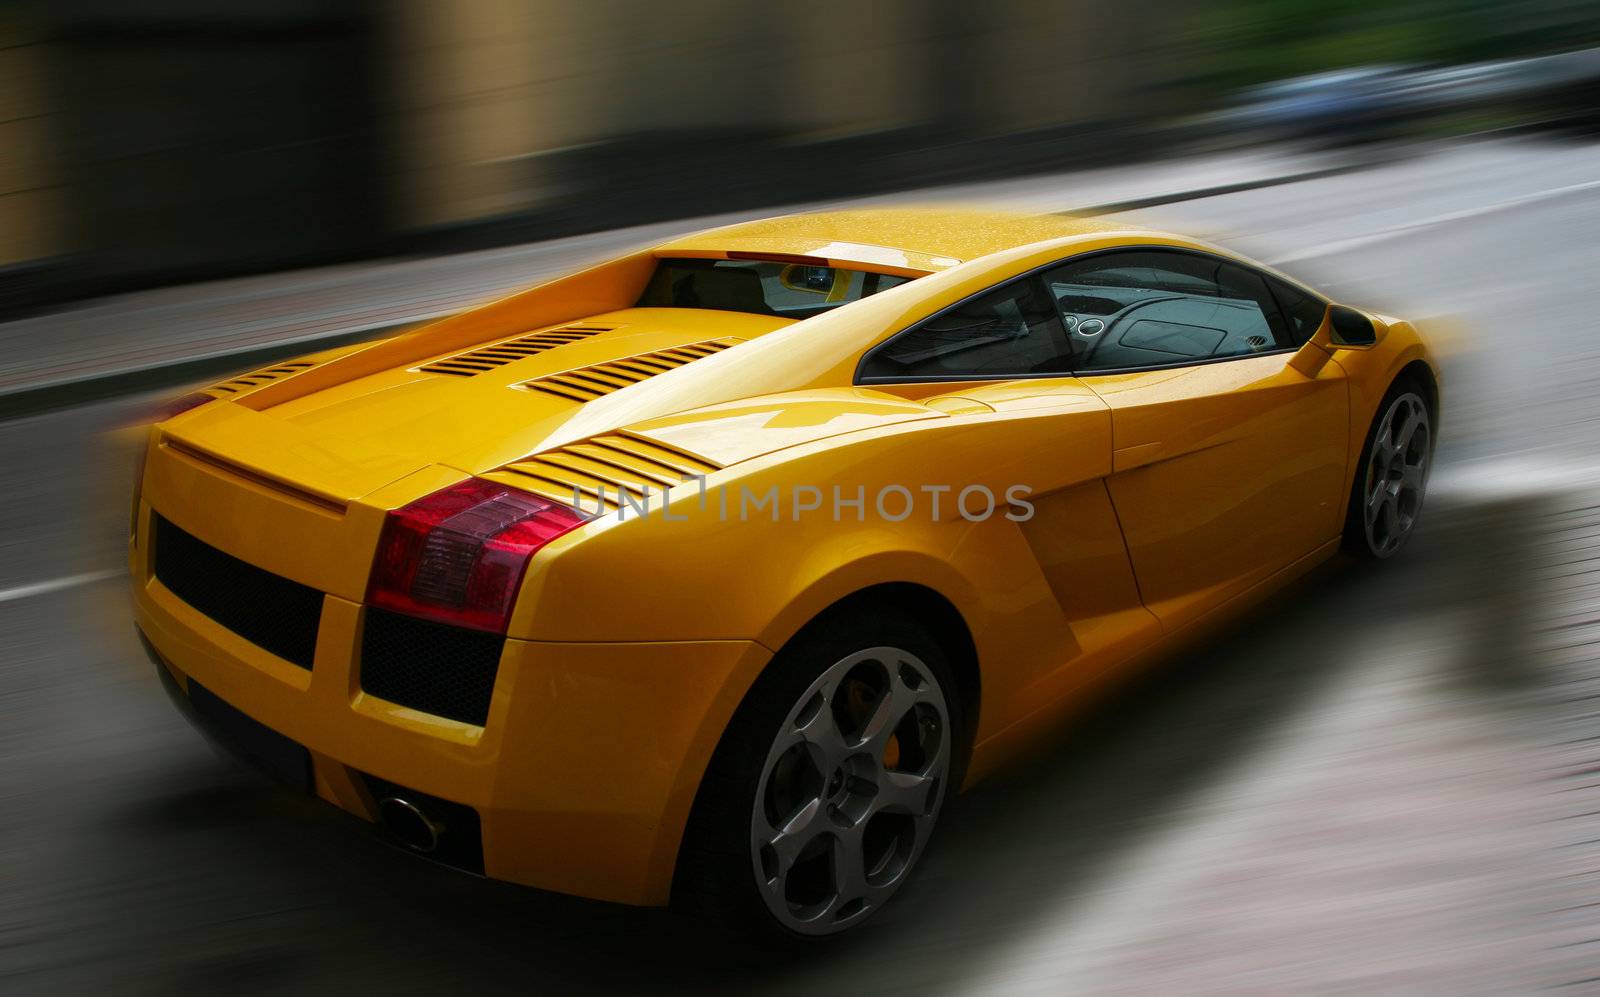 The image of the yellow respectable automobile on a dim background